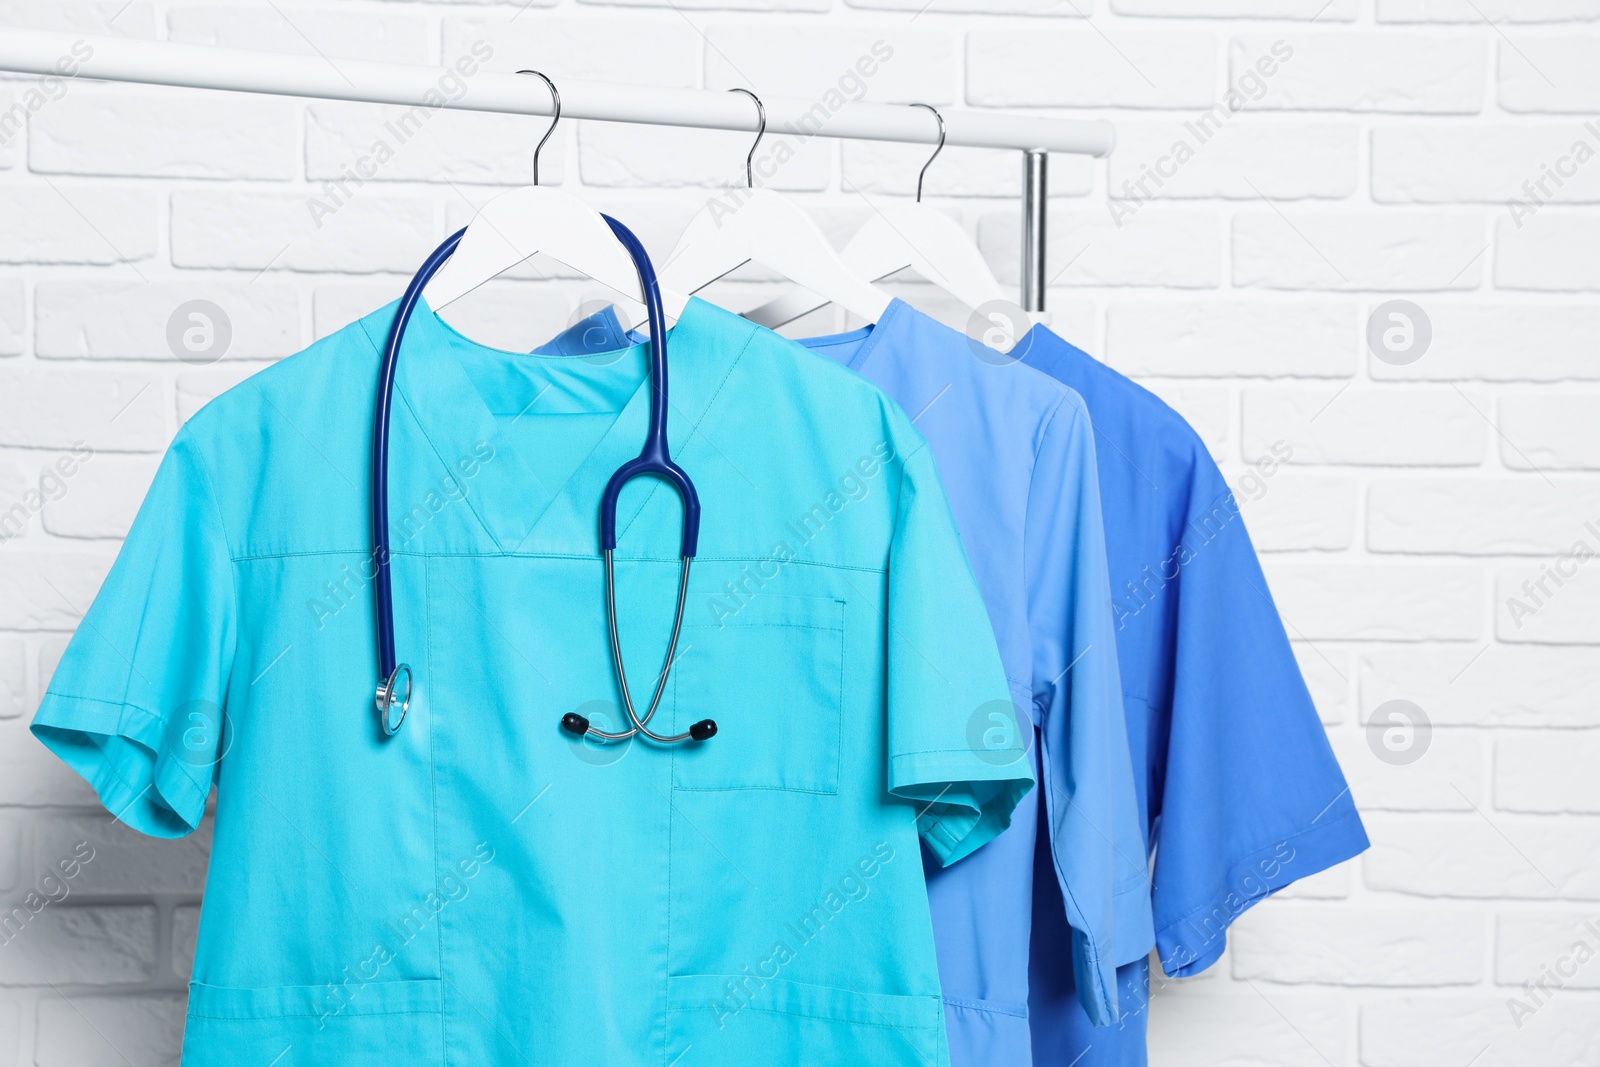 Photo of Medical uniforms and stethoscope hanging on rack near white brick wall